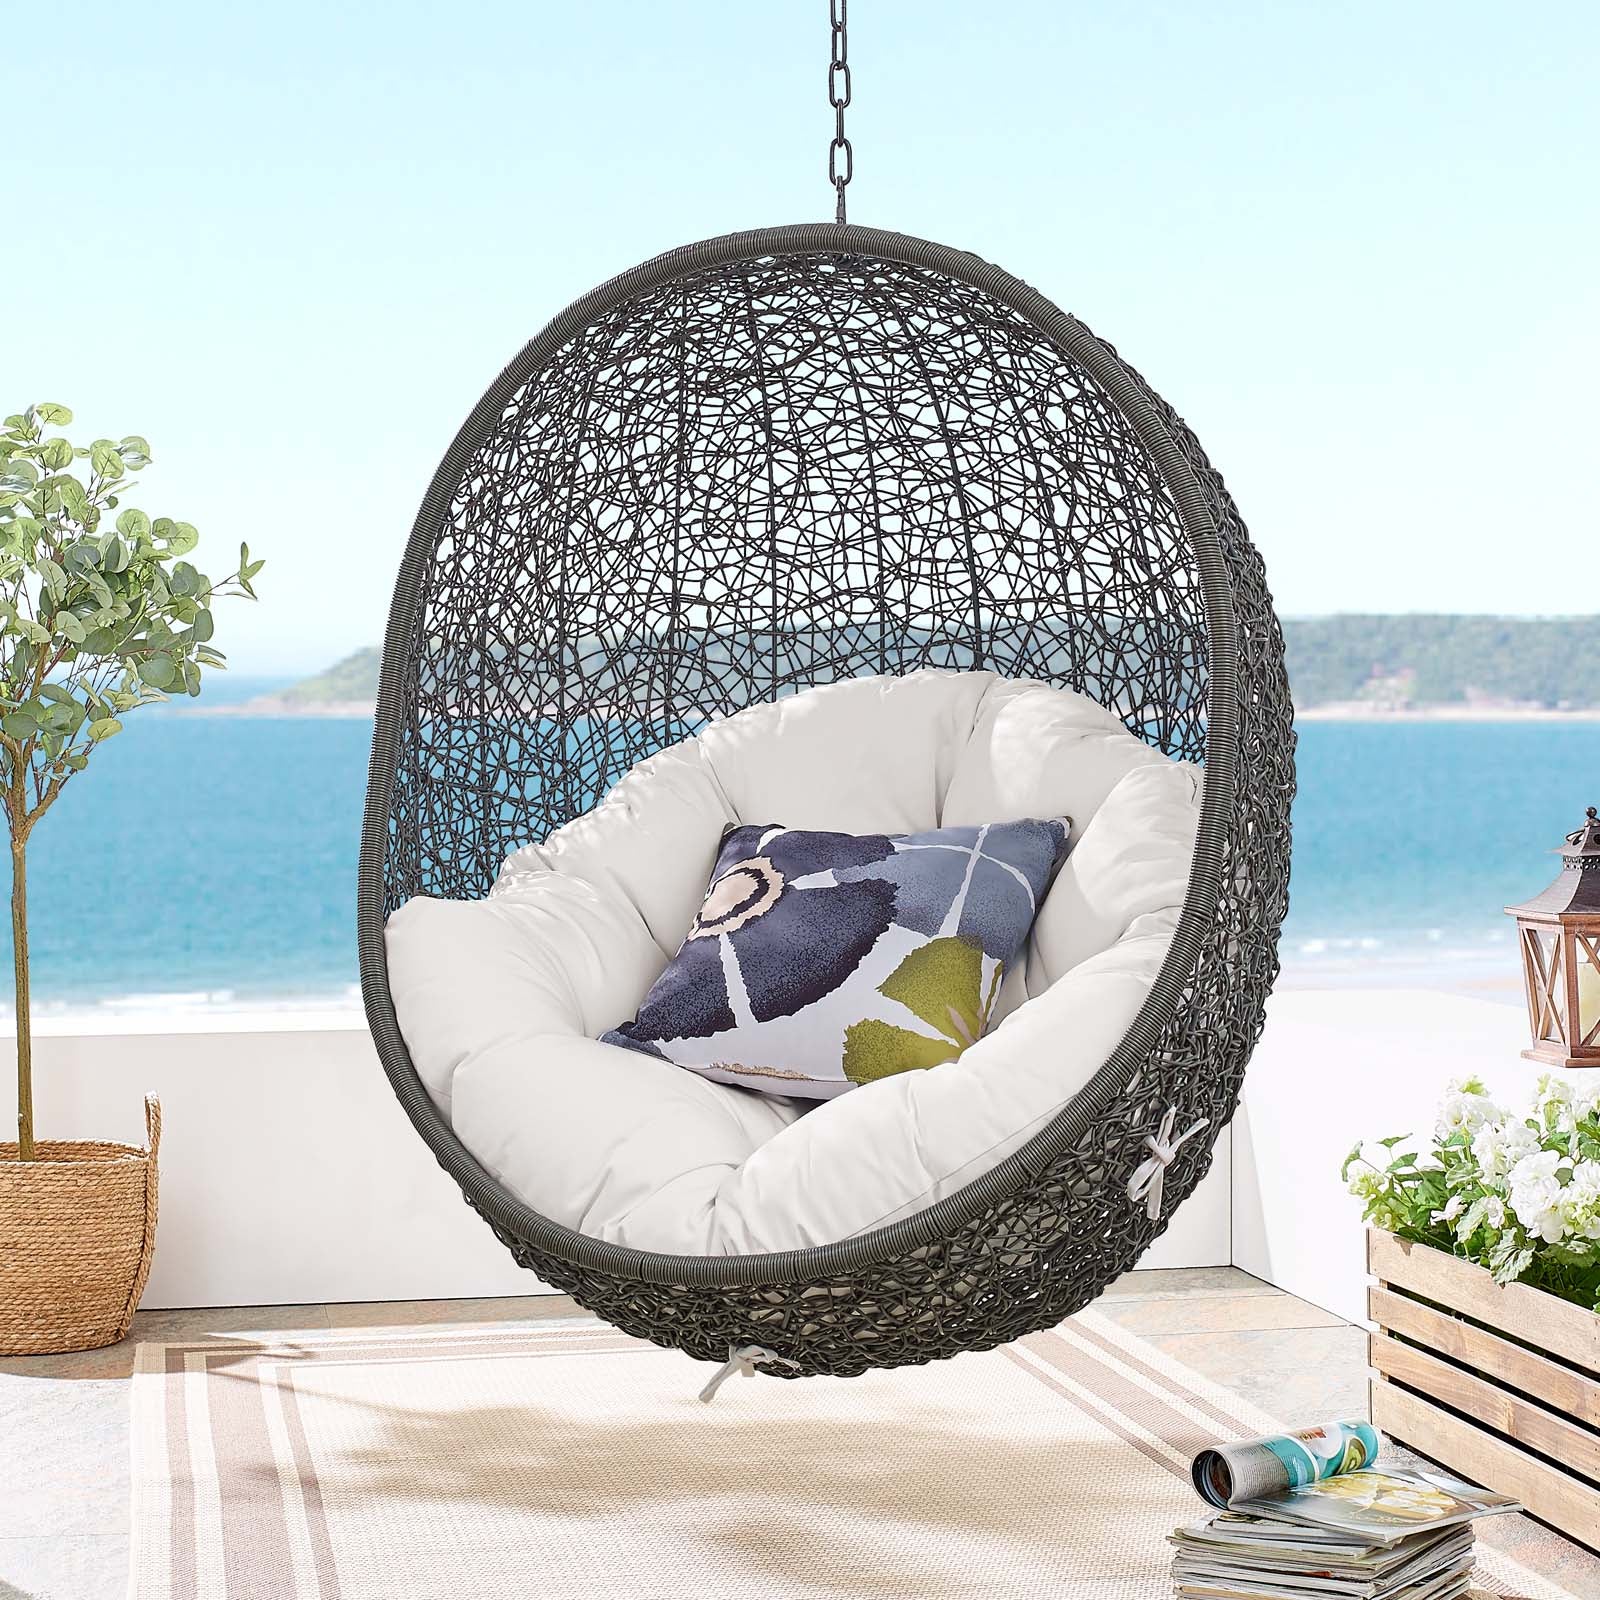 Hide Outdoor Patio Sunbrella® Swing Chair With Stand